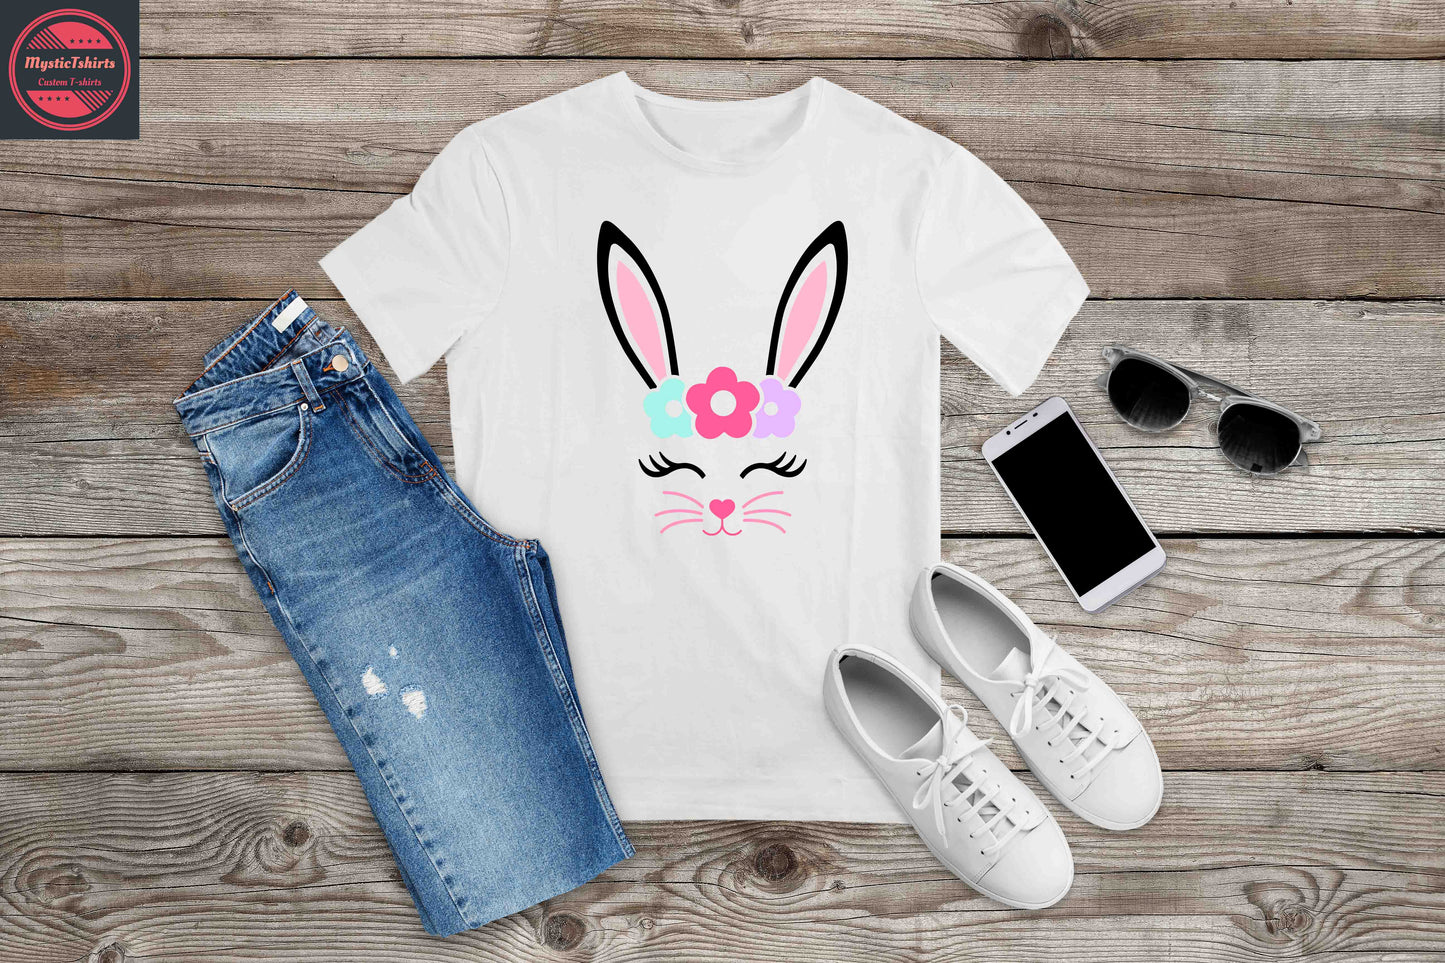 039. BUNNY FACE WITH FLOWERS, Custom Made Shirt, Personalized T-Shirt, Custom Text, Make Your Own Shirt, Custom Tee